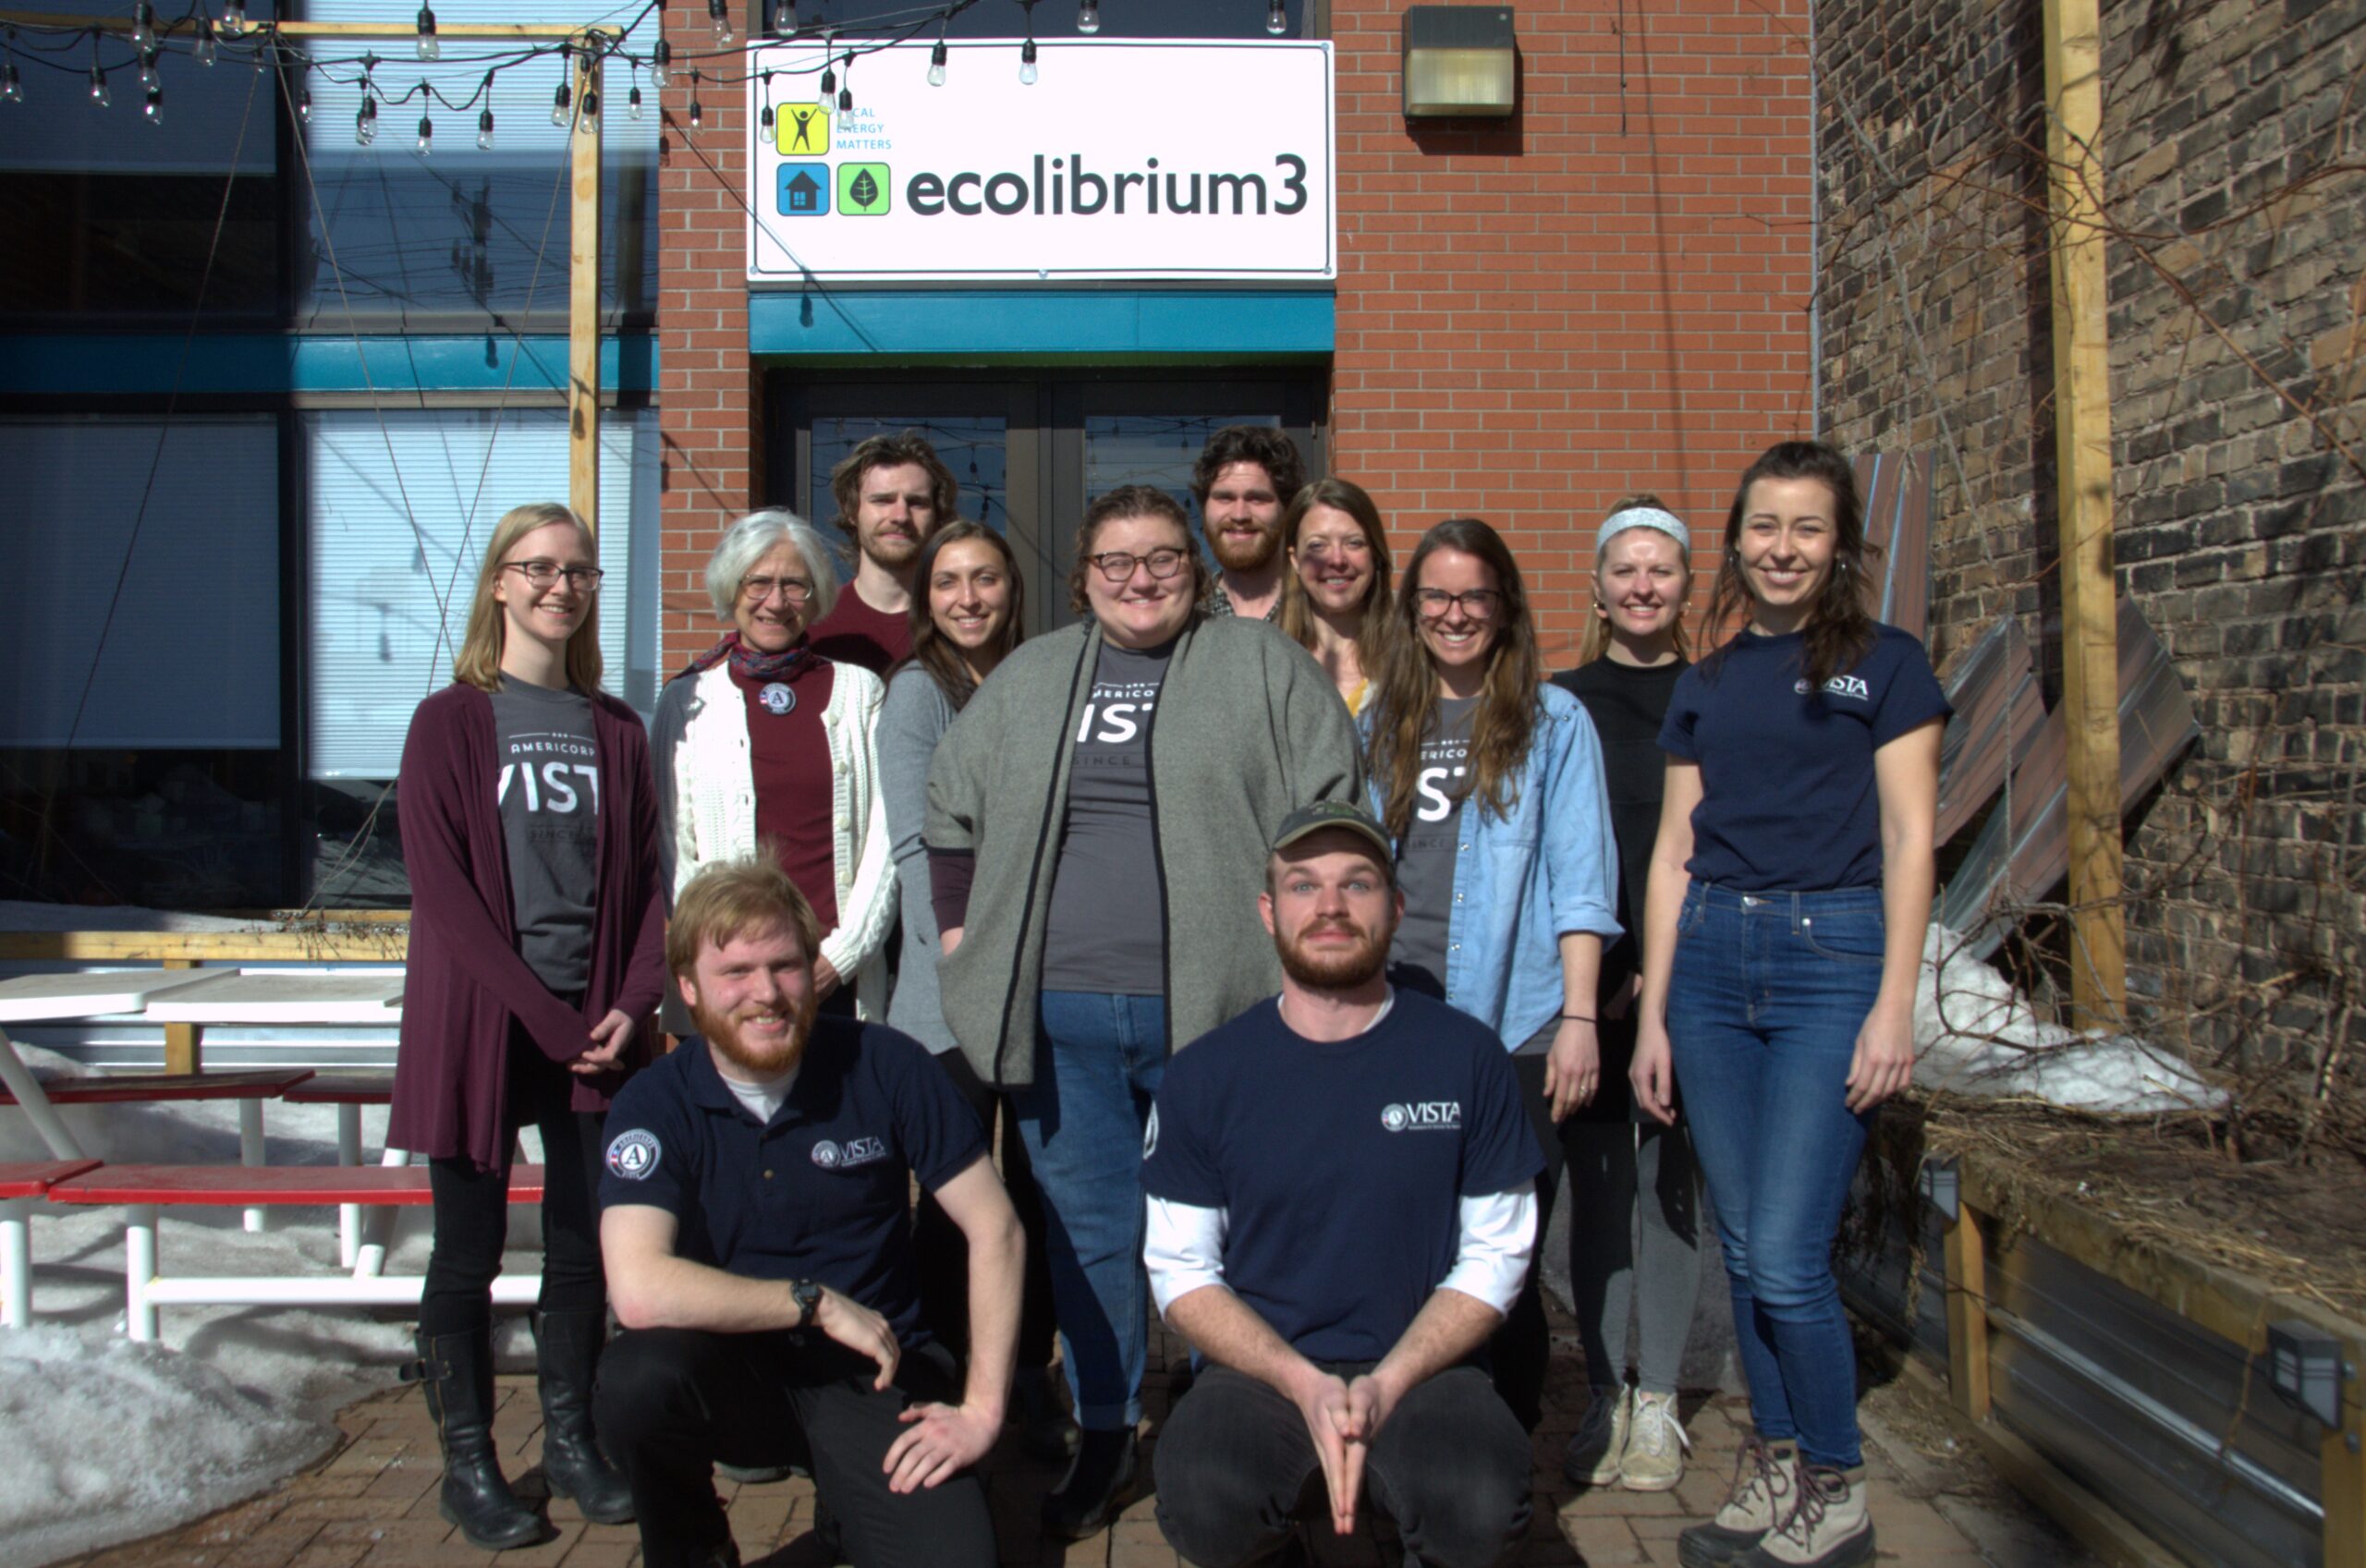 Twelve people pose for a group photo in front of a brick building with an Ecolibrium3 sign on it.